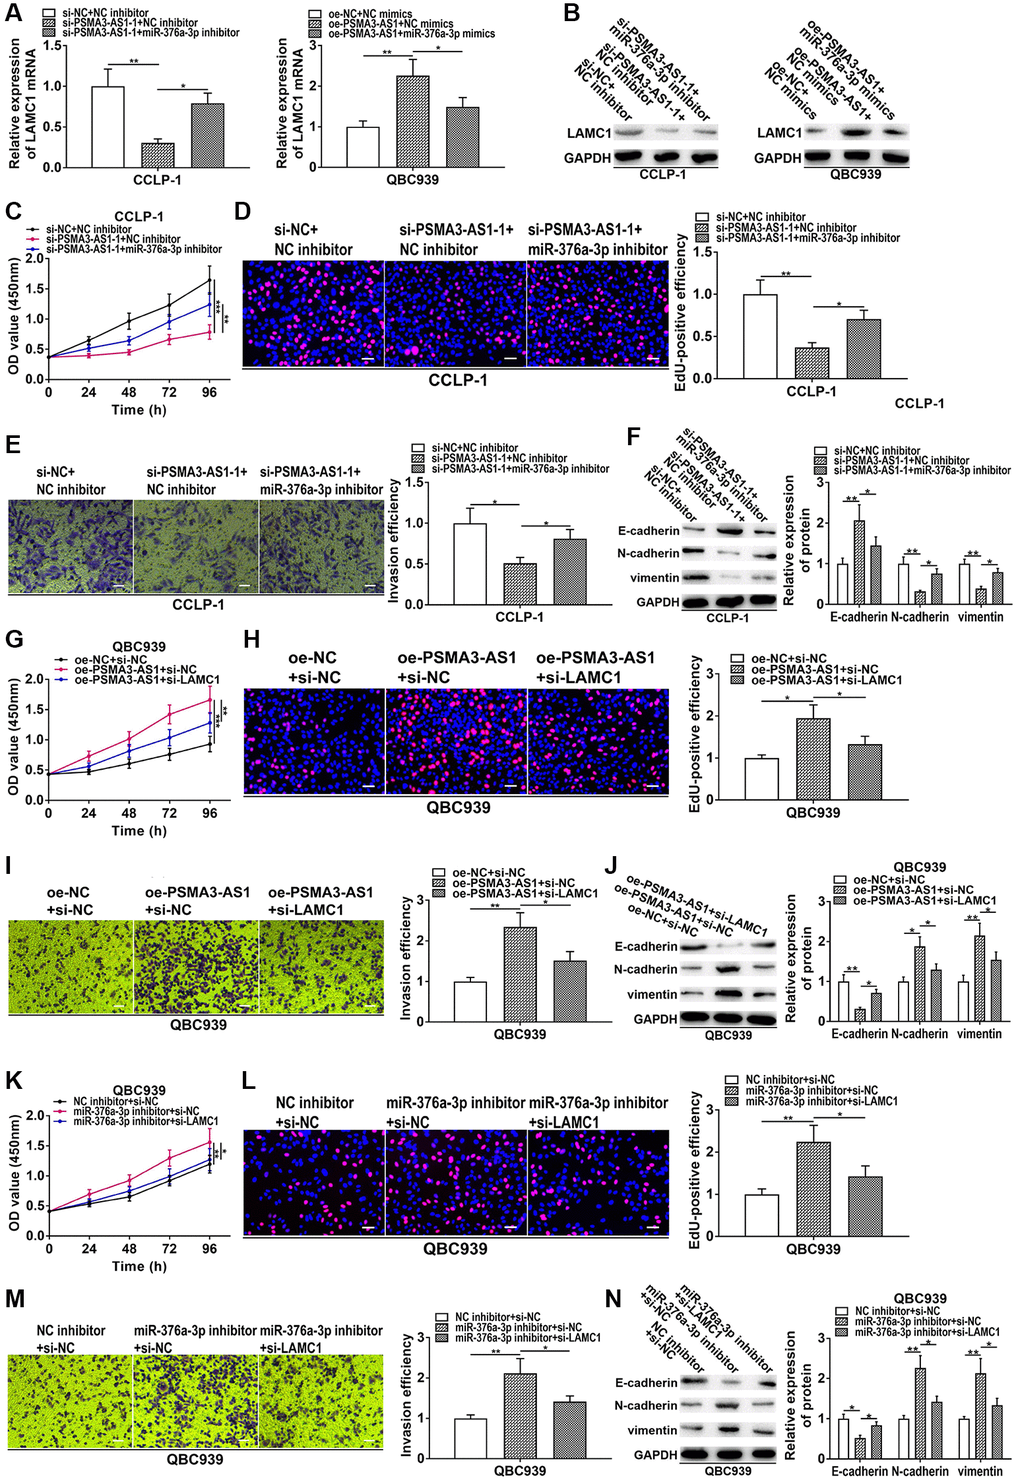 PSMA3-AS1 up-regulates LAMC1 by sponging miR-376a-3p to accelerate CCA development. (A, B) Knockdown of PSMA3-AS1 inhibited LAMC1 expression in CCA cells, but co-transfection of miR-376a-3p inhibitor rescued this process. On the contrary, overexpression of PSMA3-AS1 promoted LAMC1 expression, whereas co-transfection of miR-376a-3p mimics could save the promoting effect caused by PSMA3-AS1 overexpression. (C–F) Knocking down miR-376a-3p could reverse the inhibition of proliferation, invasion and EMT caused by PSMA3-AS1 knockdown. (G–J) Downregulated LAMC1 could rescue the promotion of proliferation, invasion and EMT generated by PSMA3-AS1 overexpression. (K–N) Knocking down miR-376a-3p promoted the proliferation, invasion and EMT process of CCA cells, however, these promotive effects were attenuated by LAMC1 knockdown. *P **P ***P 